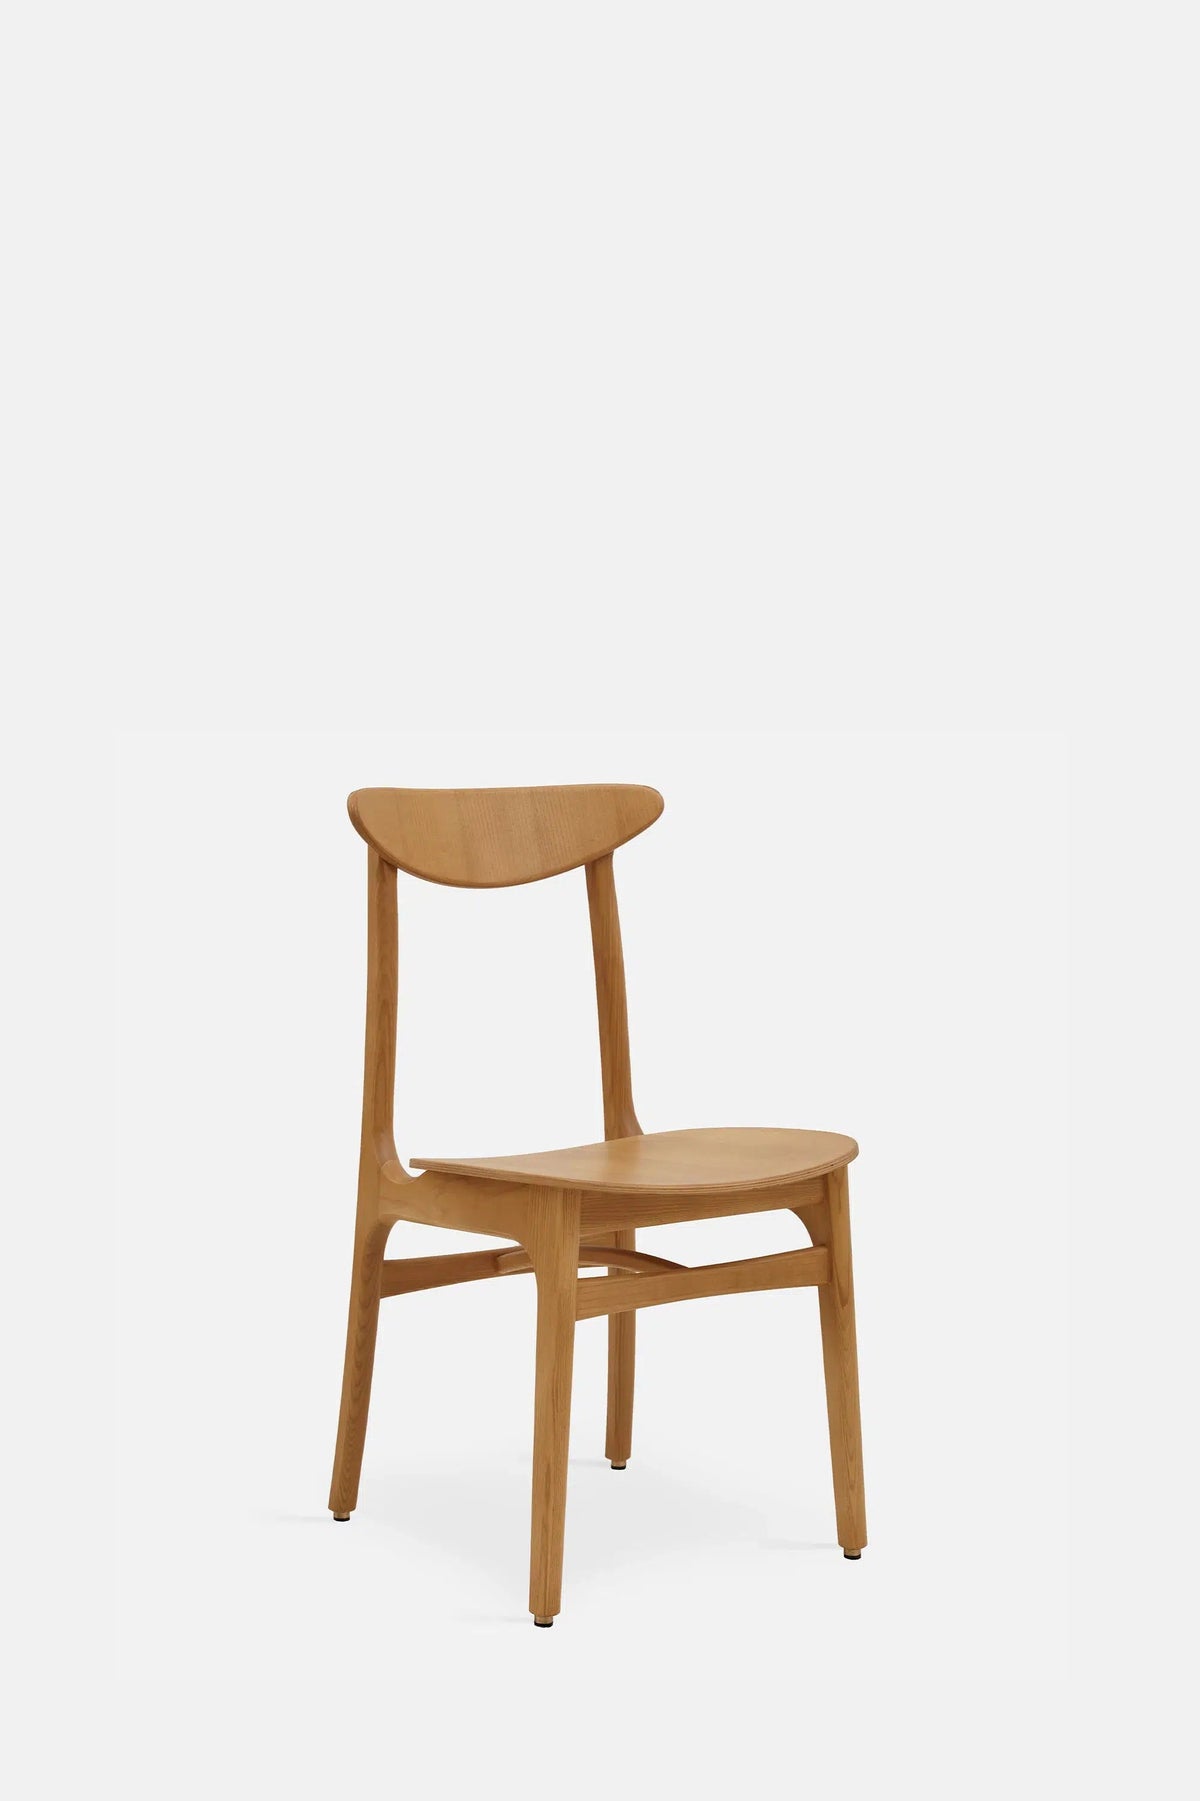 200-190 Timber Side Chair-366 Concept-Contract Furniture Store